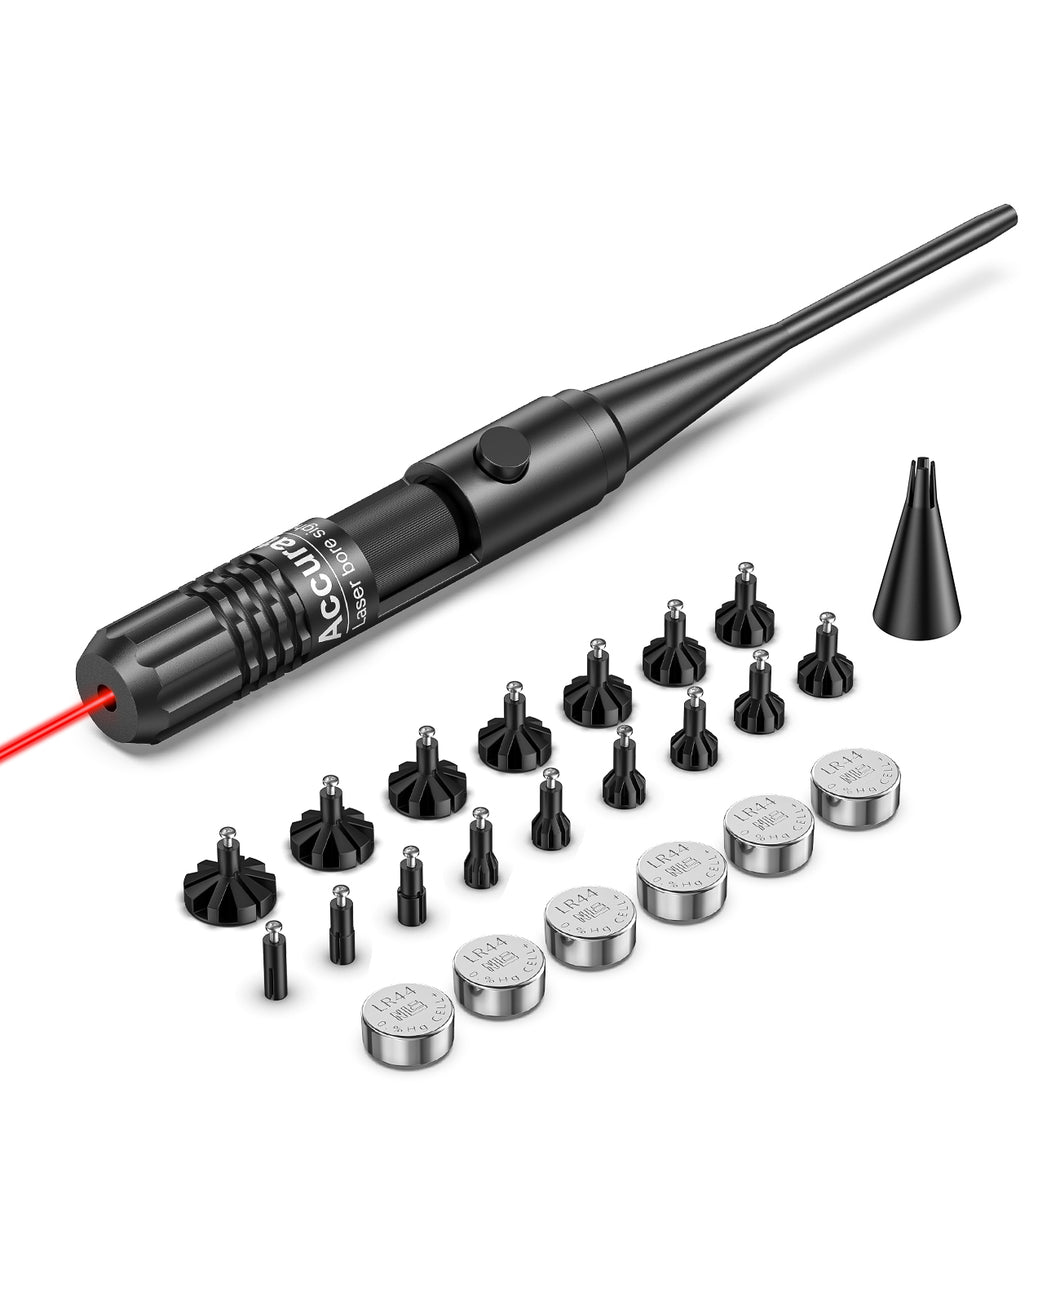 MidTen Bore Sight kit with Big Button Switch Red Laser Bore Sighter for 0.177 to 12GA Caliber